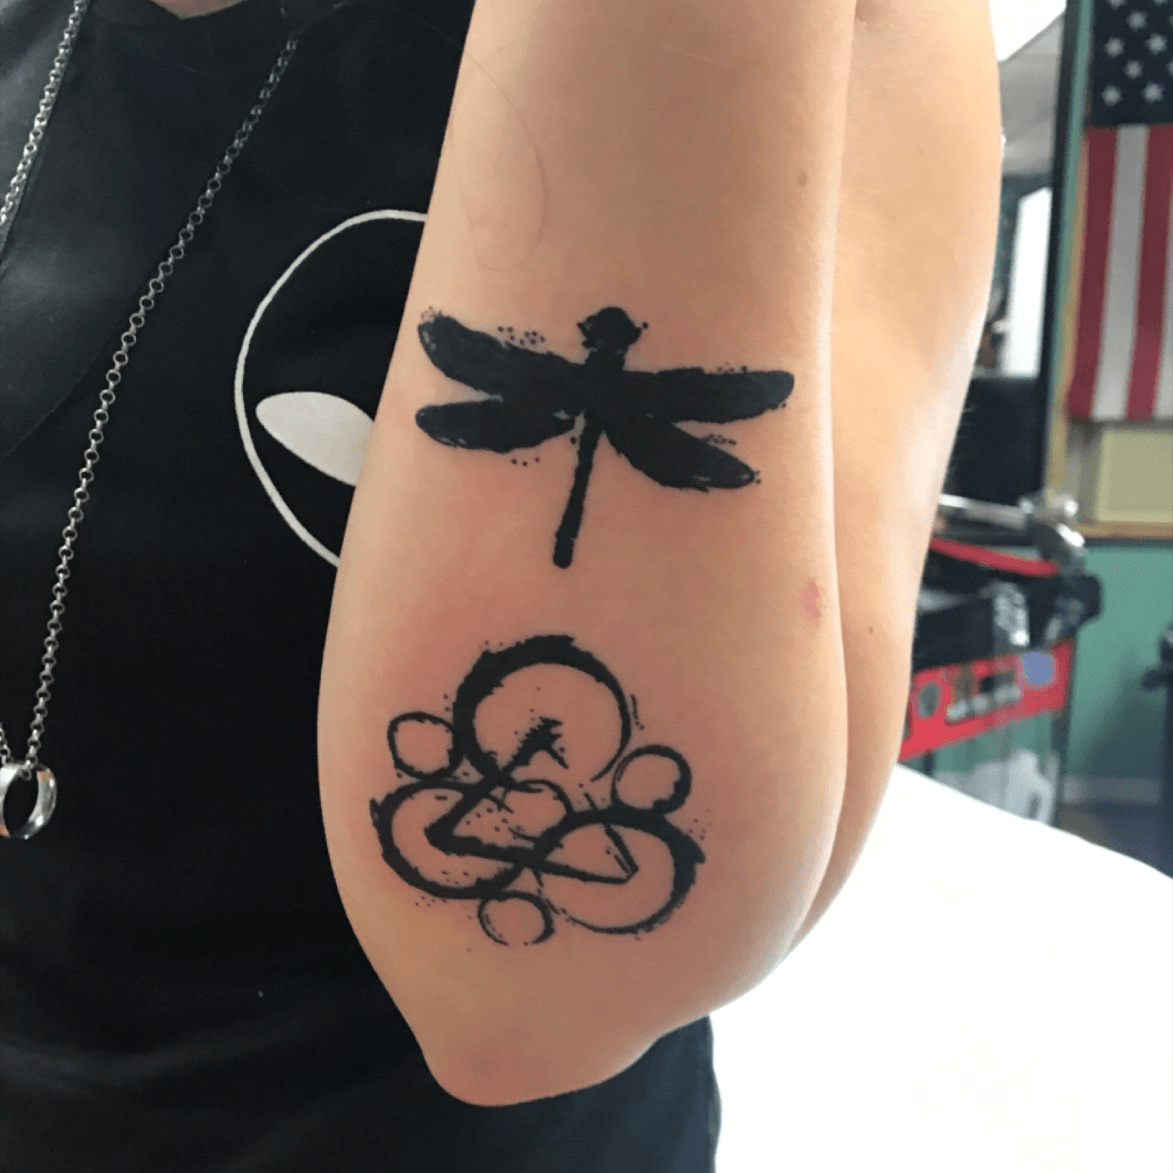 My second tattoo but my first Coheed onr  rTheFence